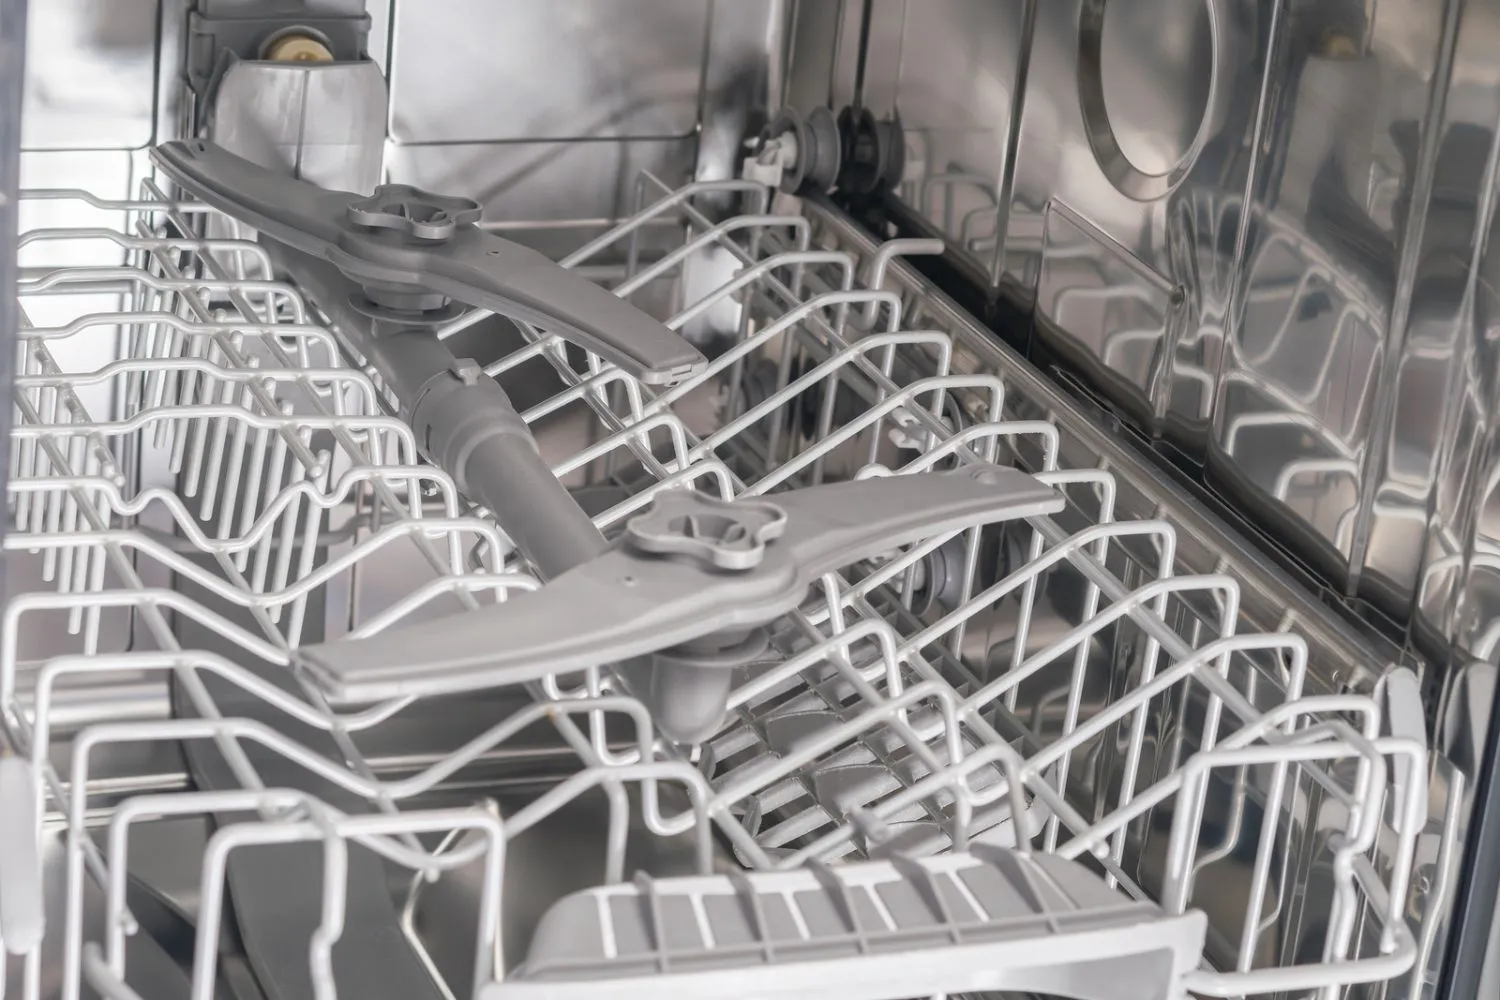 How To Clean a Dishwasher Without Running It